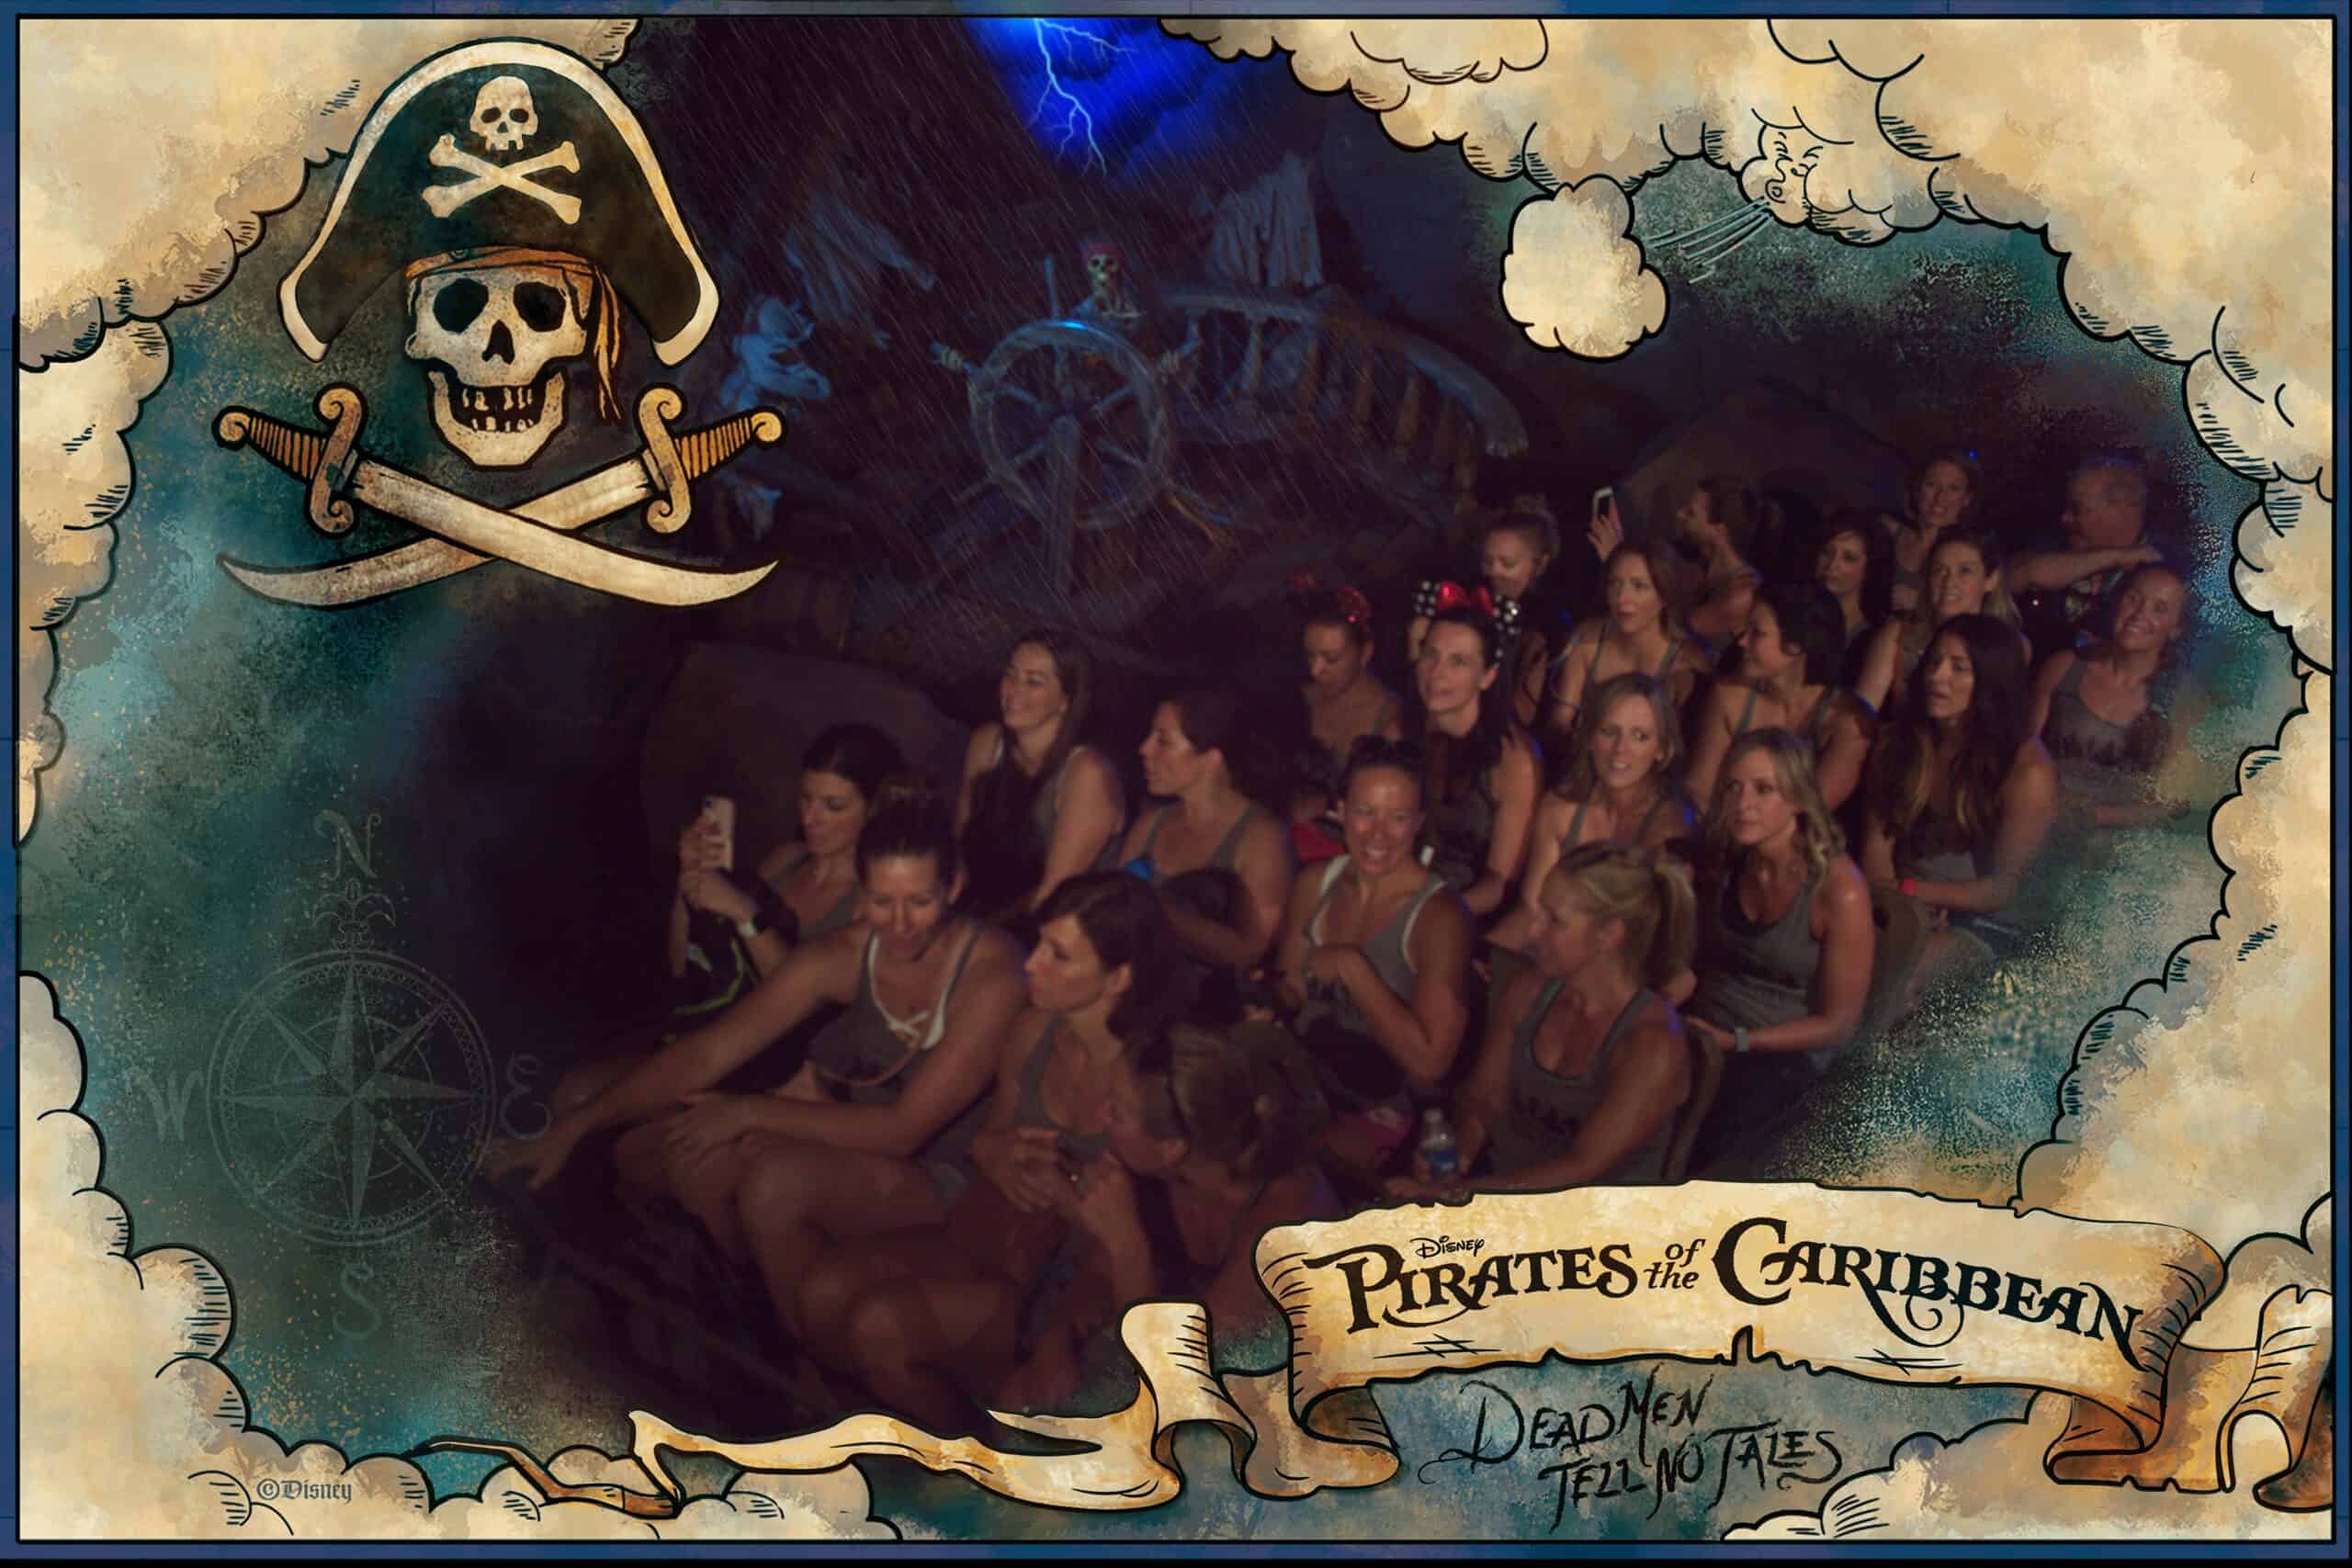 Pirates of the Caribbean Ride Photo